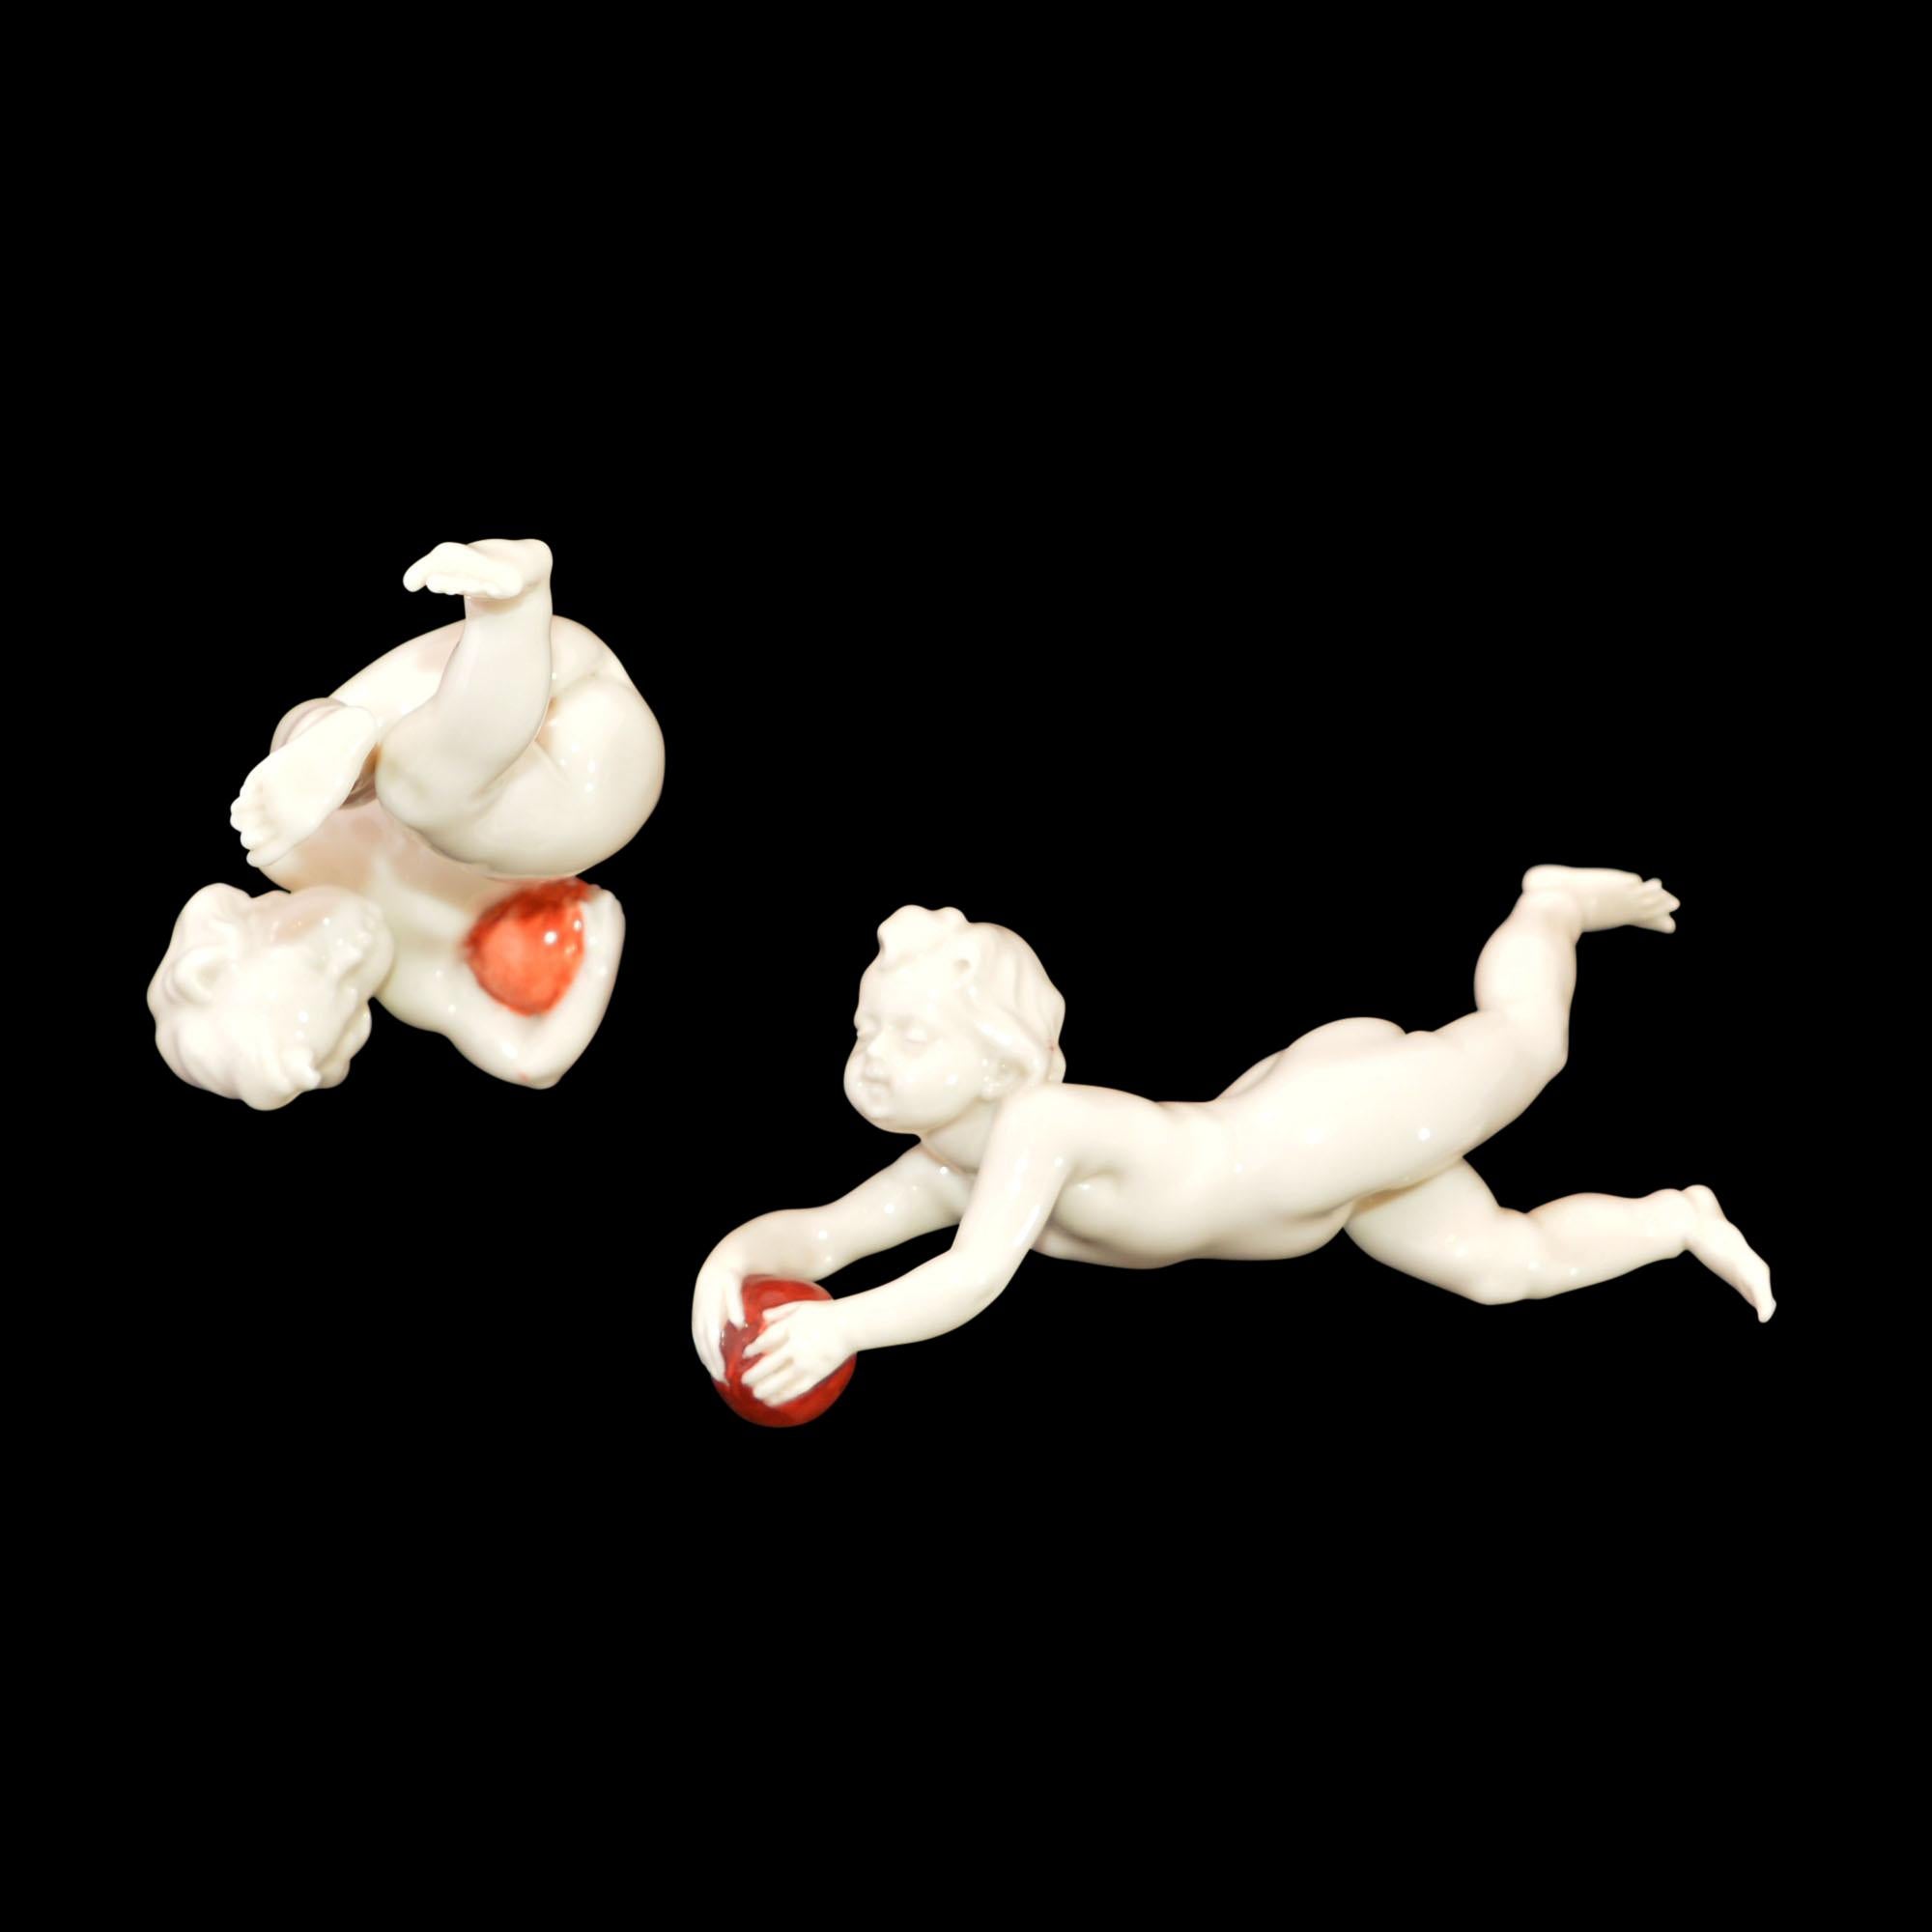 Lovely cream colored porcelain putti in motion will be sure to bring a smile to your face when you see them. One can only imagine what the creator was thinking as he formed the playful two. The balls are painted an orangish red. The longest one